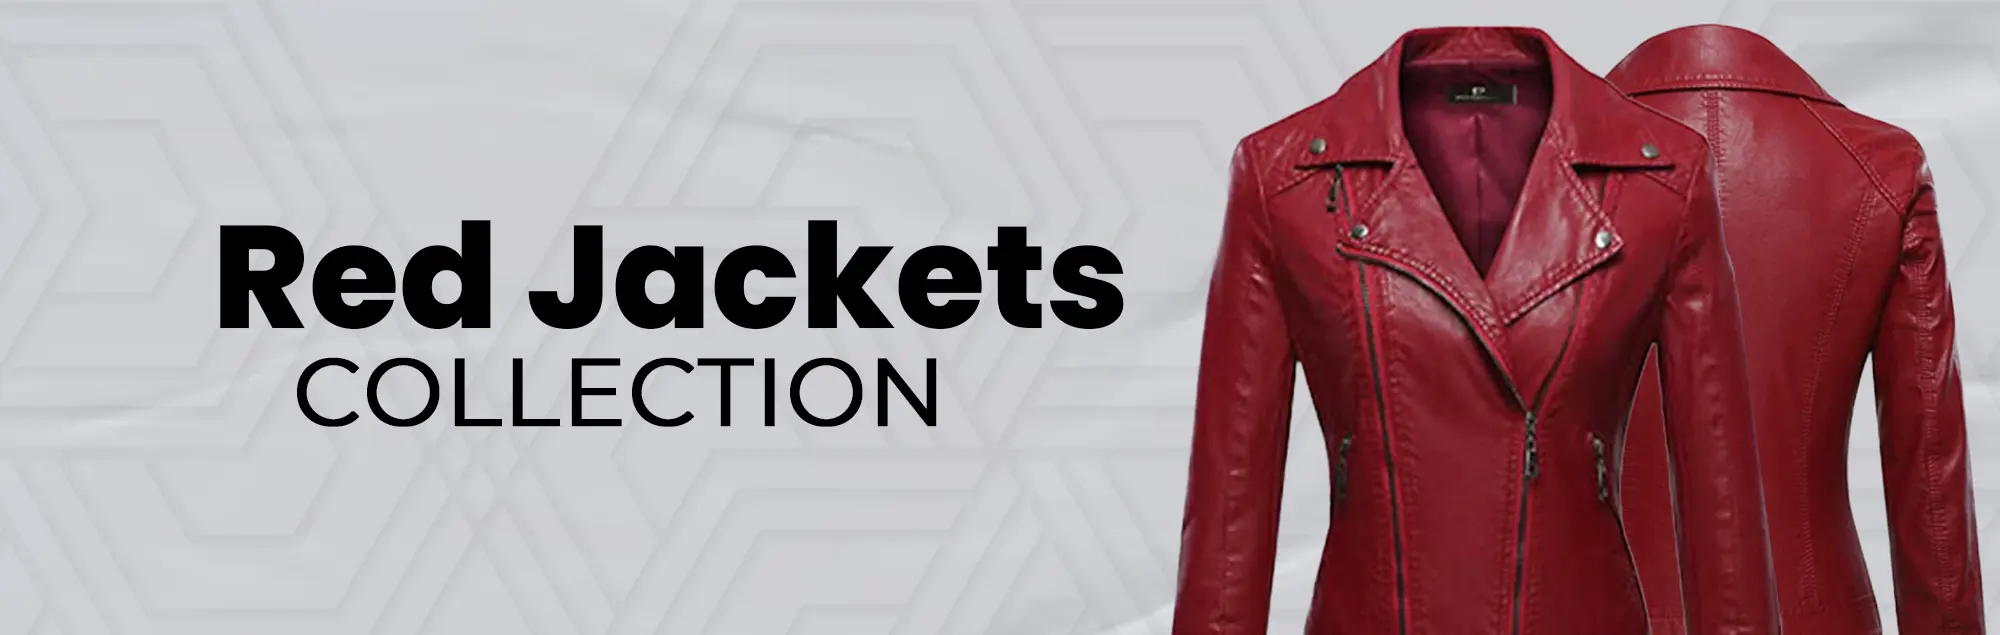 Red Leather Jacket Category Banner The Genuine Leather.com